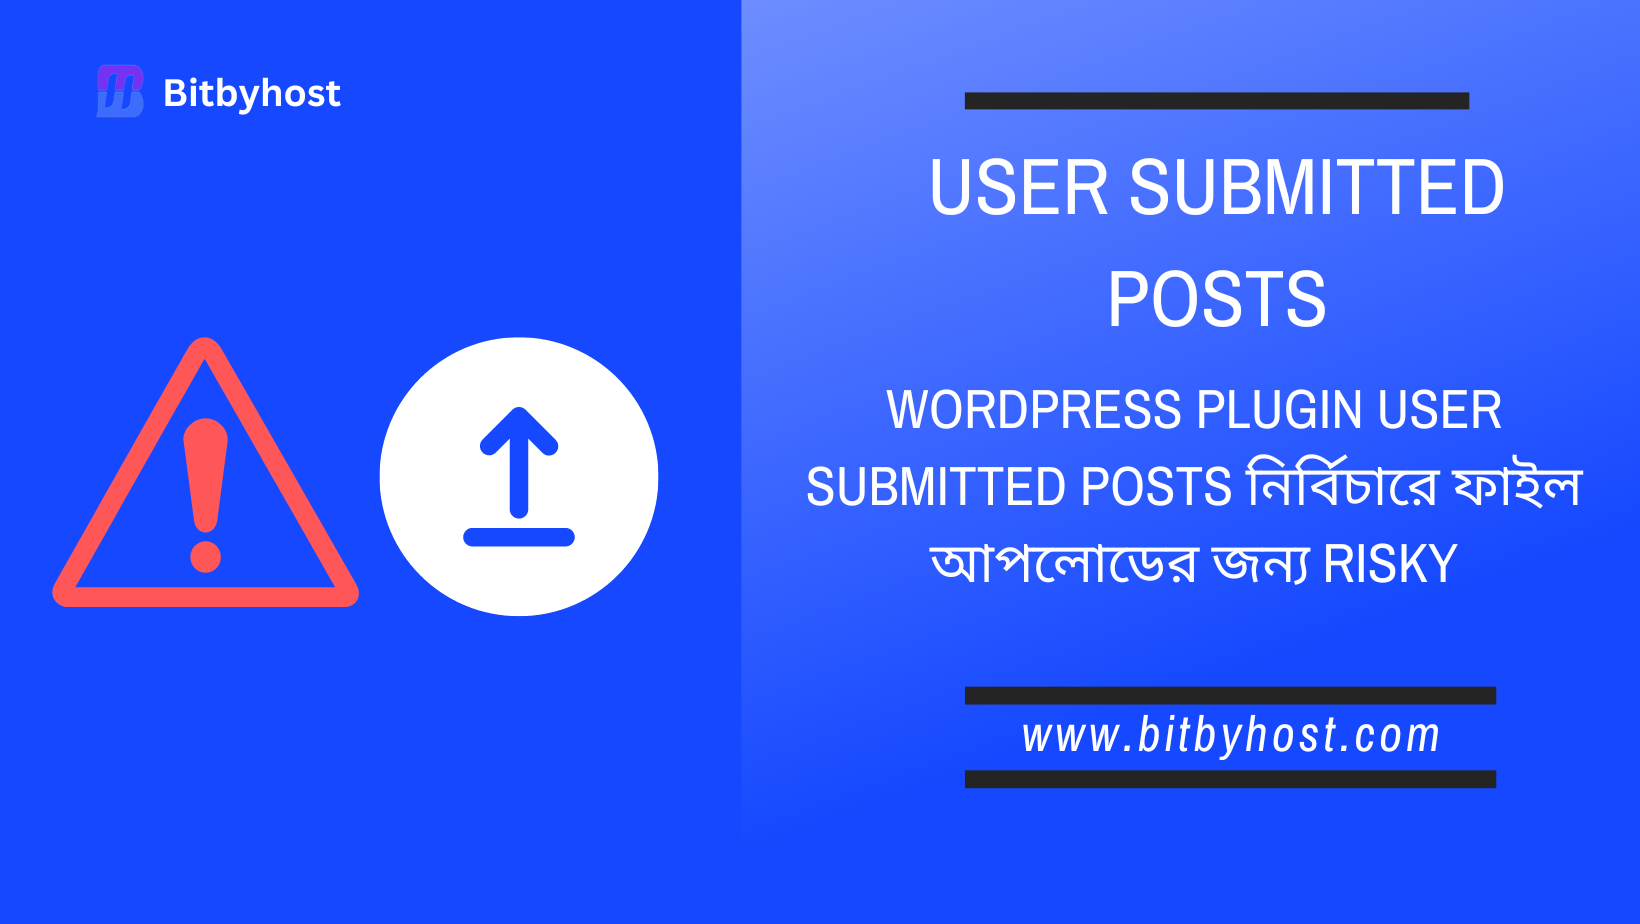 User Submitted Posts